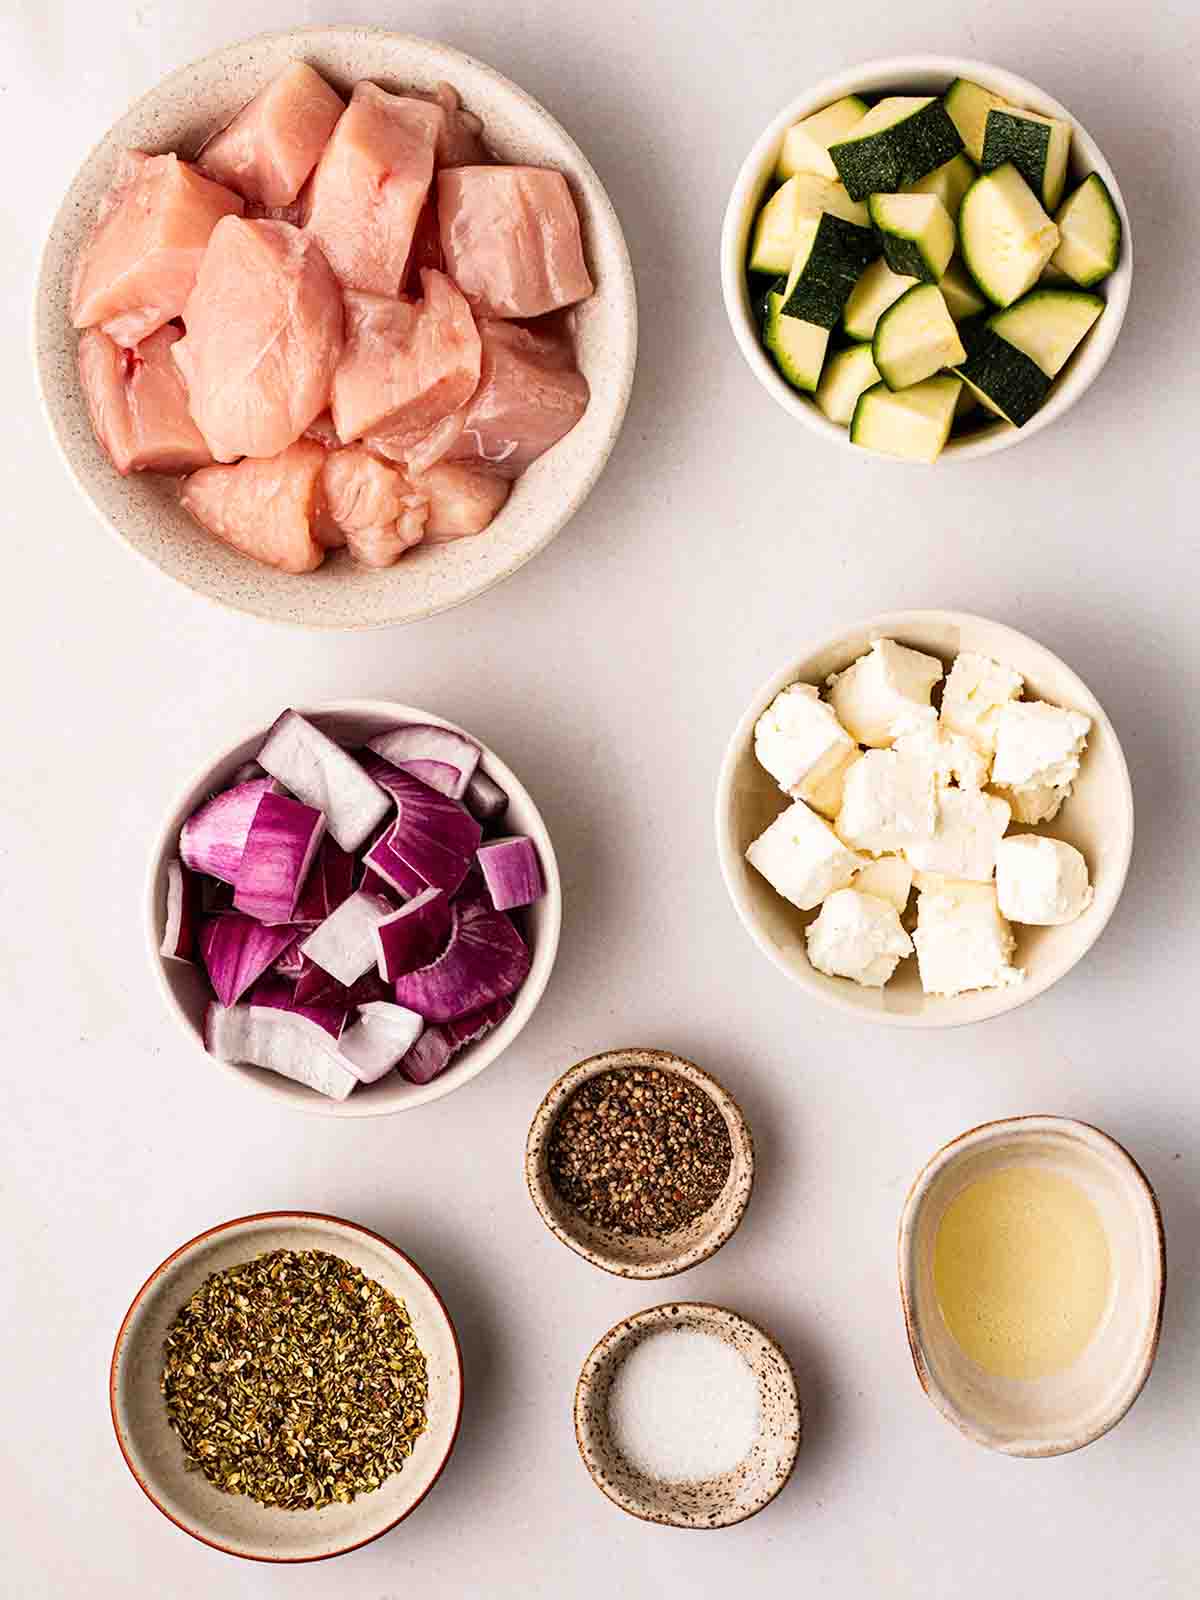 The ingredients for Air Fryer Greek Chicken Traybake chopped up and laid out on a counter top.